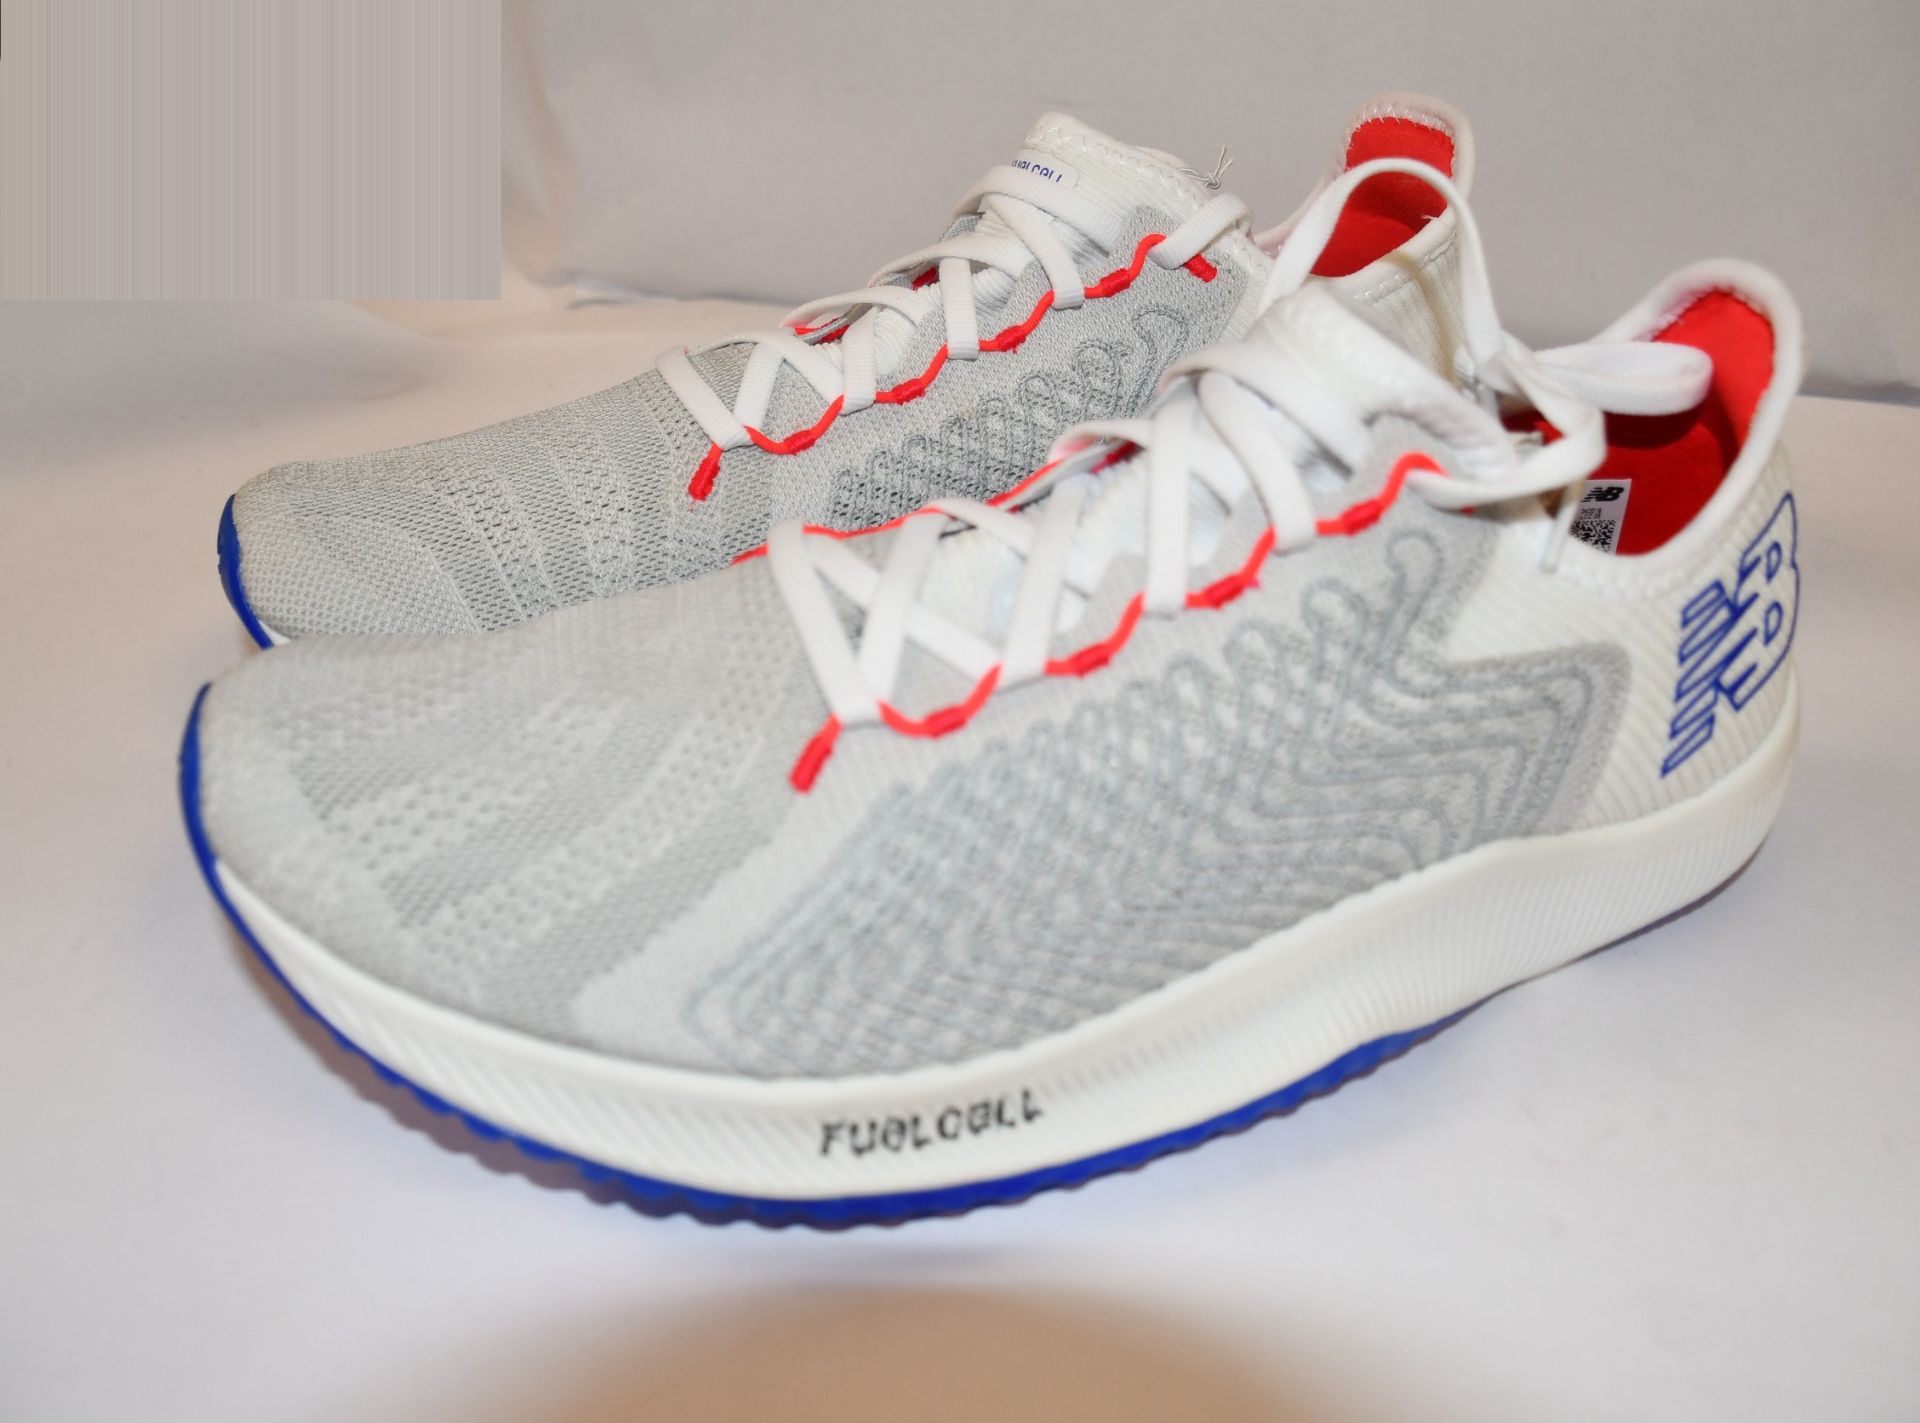 A pair of as new New Balance Fuel Cell Rebel trainers (UK 10 - No box).